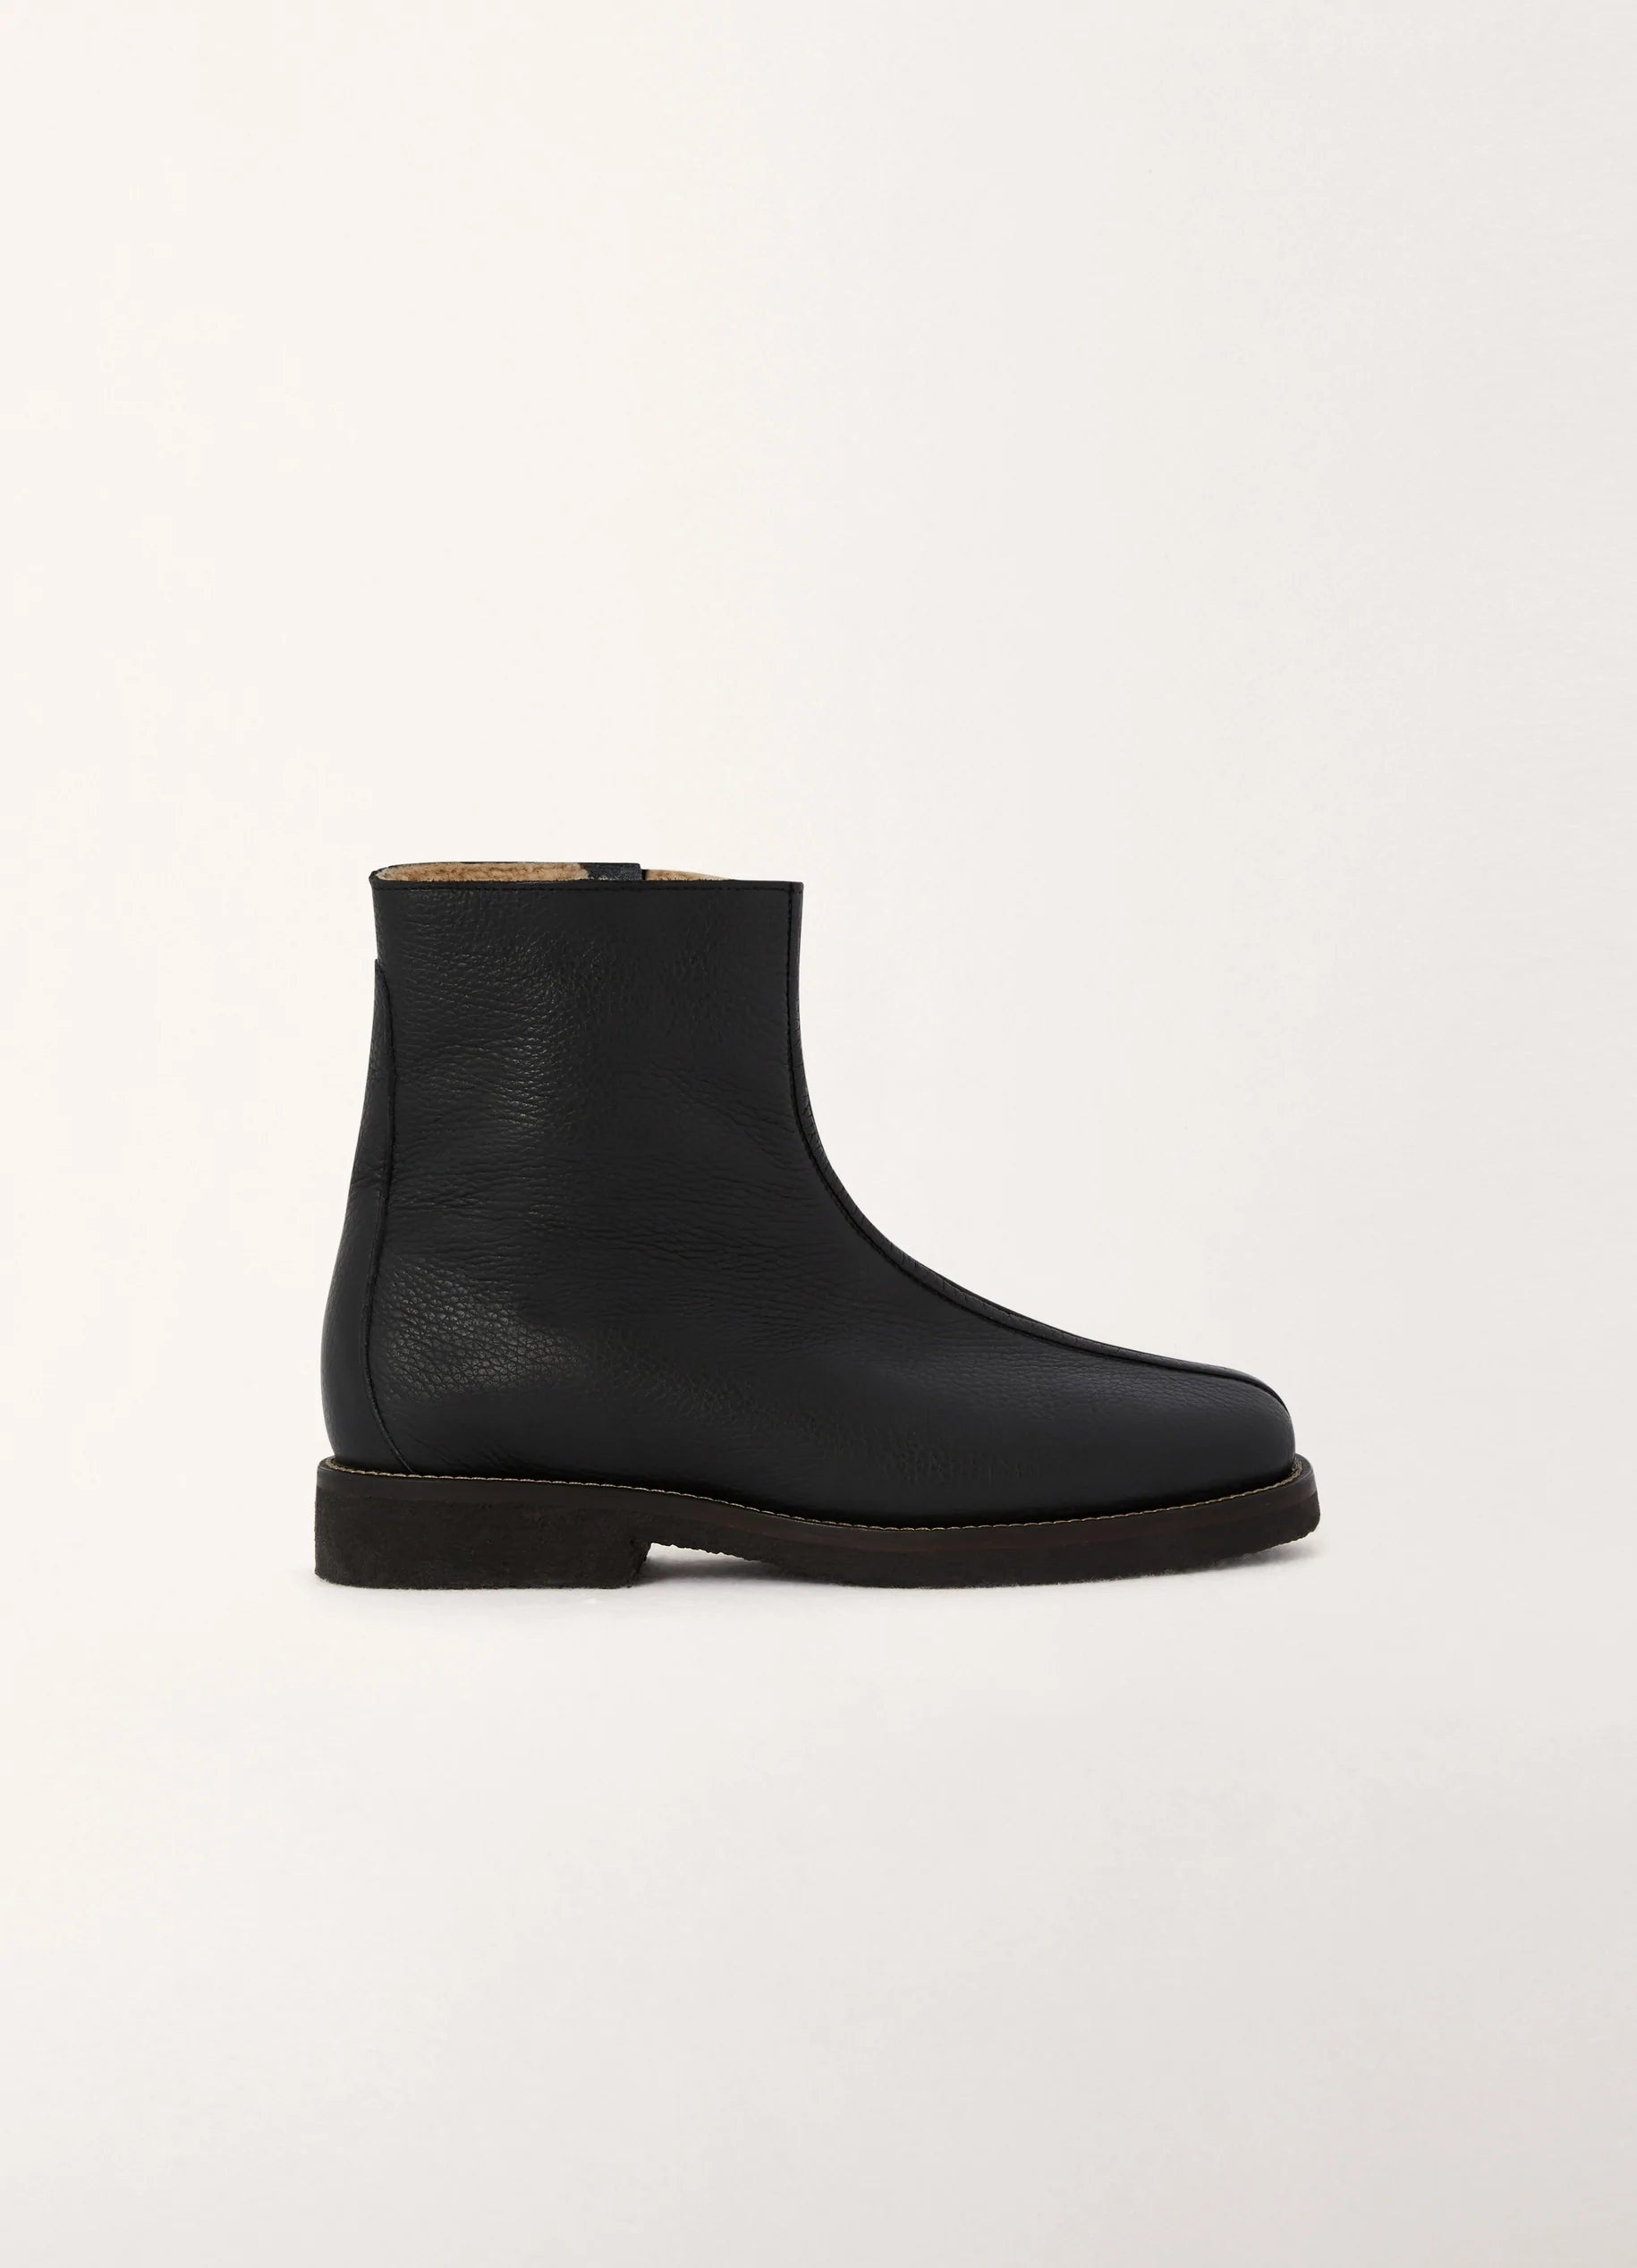 BOOTS WITH SHEARLING
GRAINE CALF LTH - 1